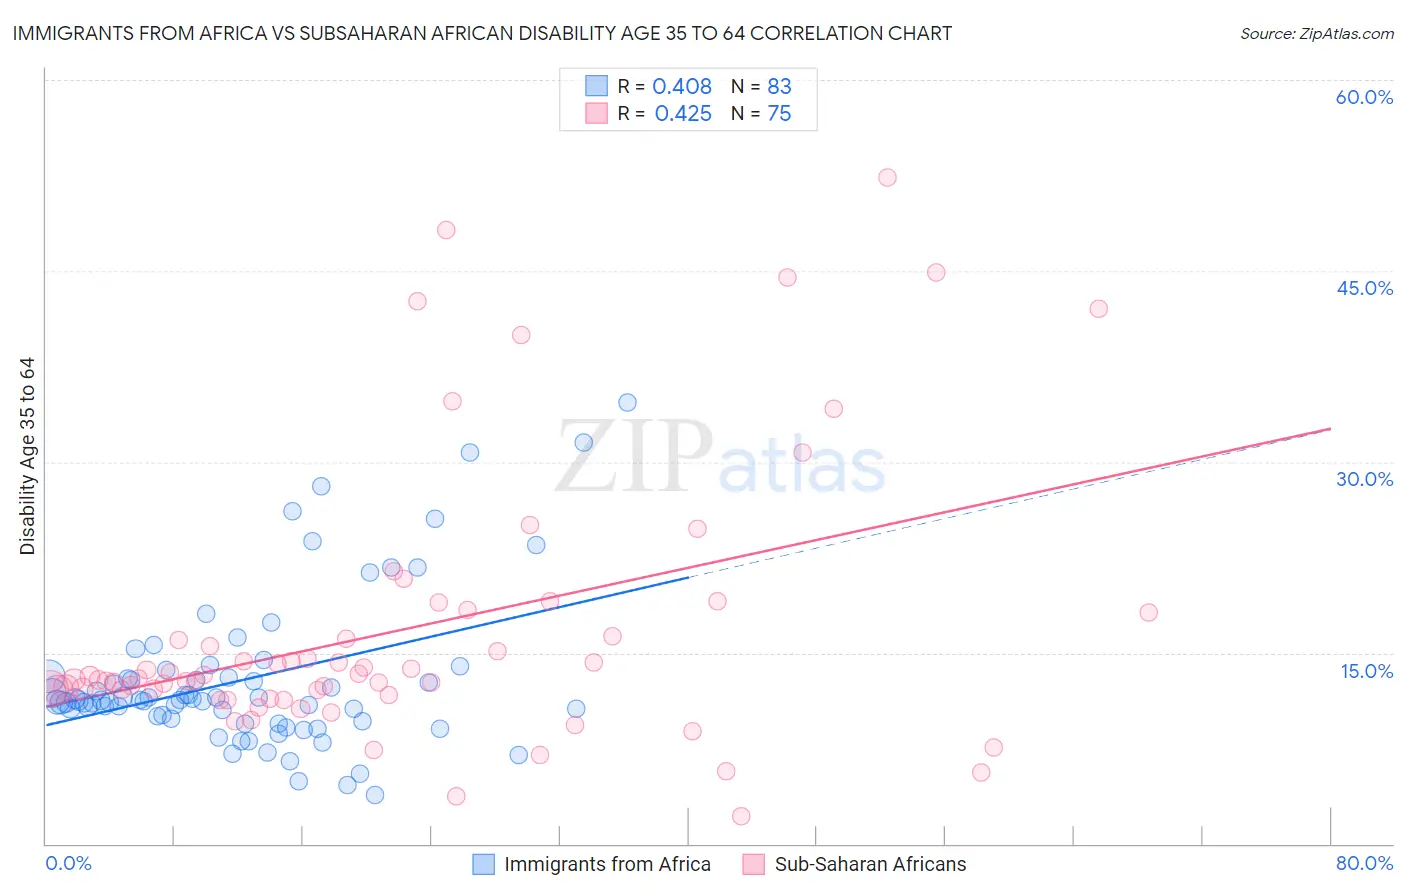 Immigrants from Africa vs Subsaharan African Disability Age 35 to 64